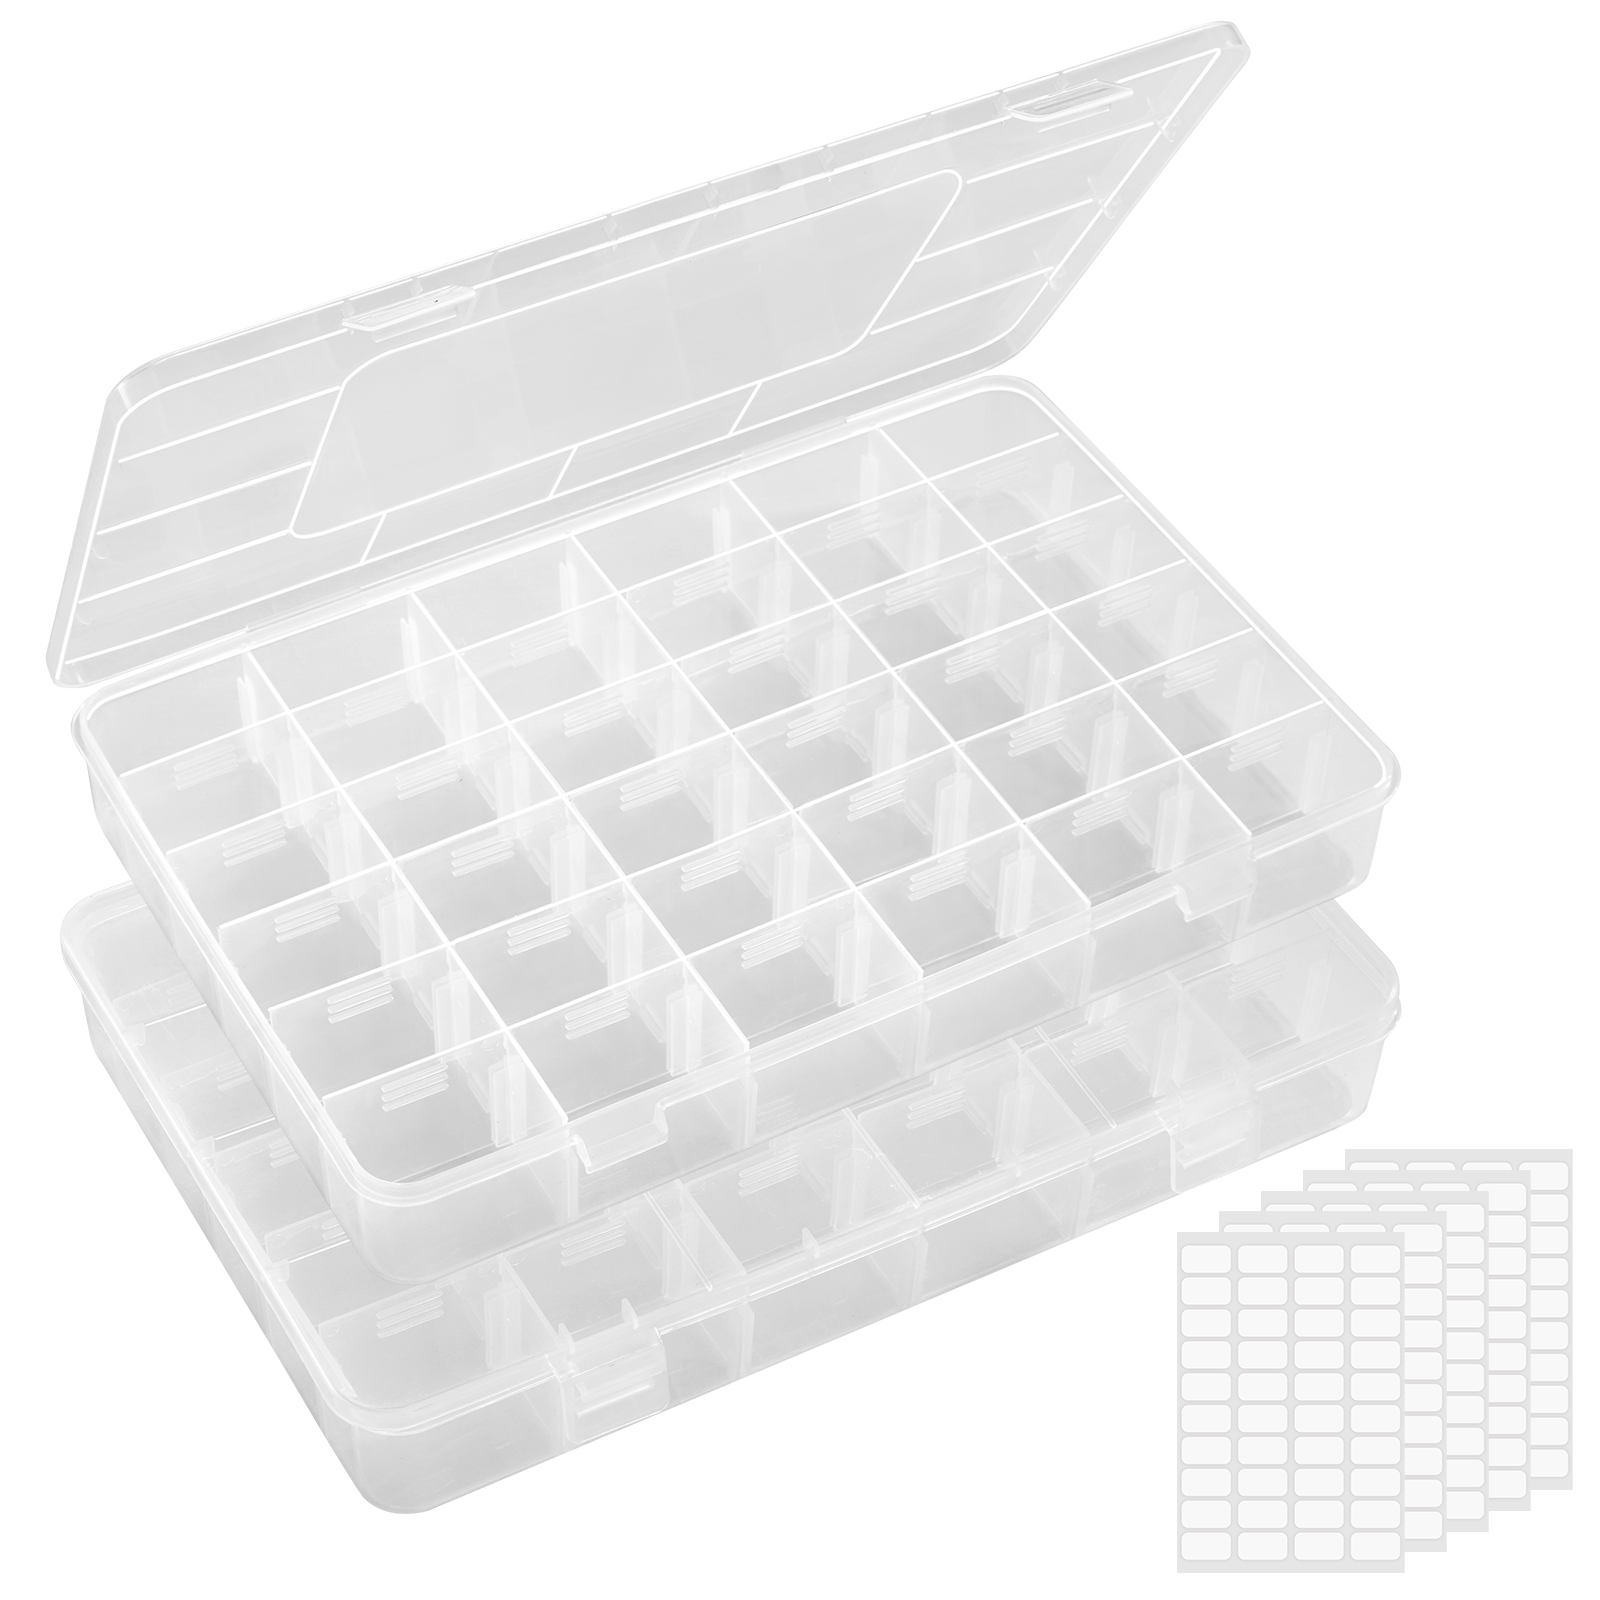 

36 Grids Clear Stackable Plastic Organizer Storage Box Container With Adjustable Dividers For Beads, Art Diy, Crafts, Jewelry, Fishing Tackle With 5 Sheet Label Stickers